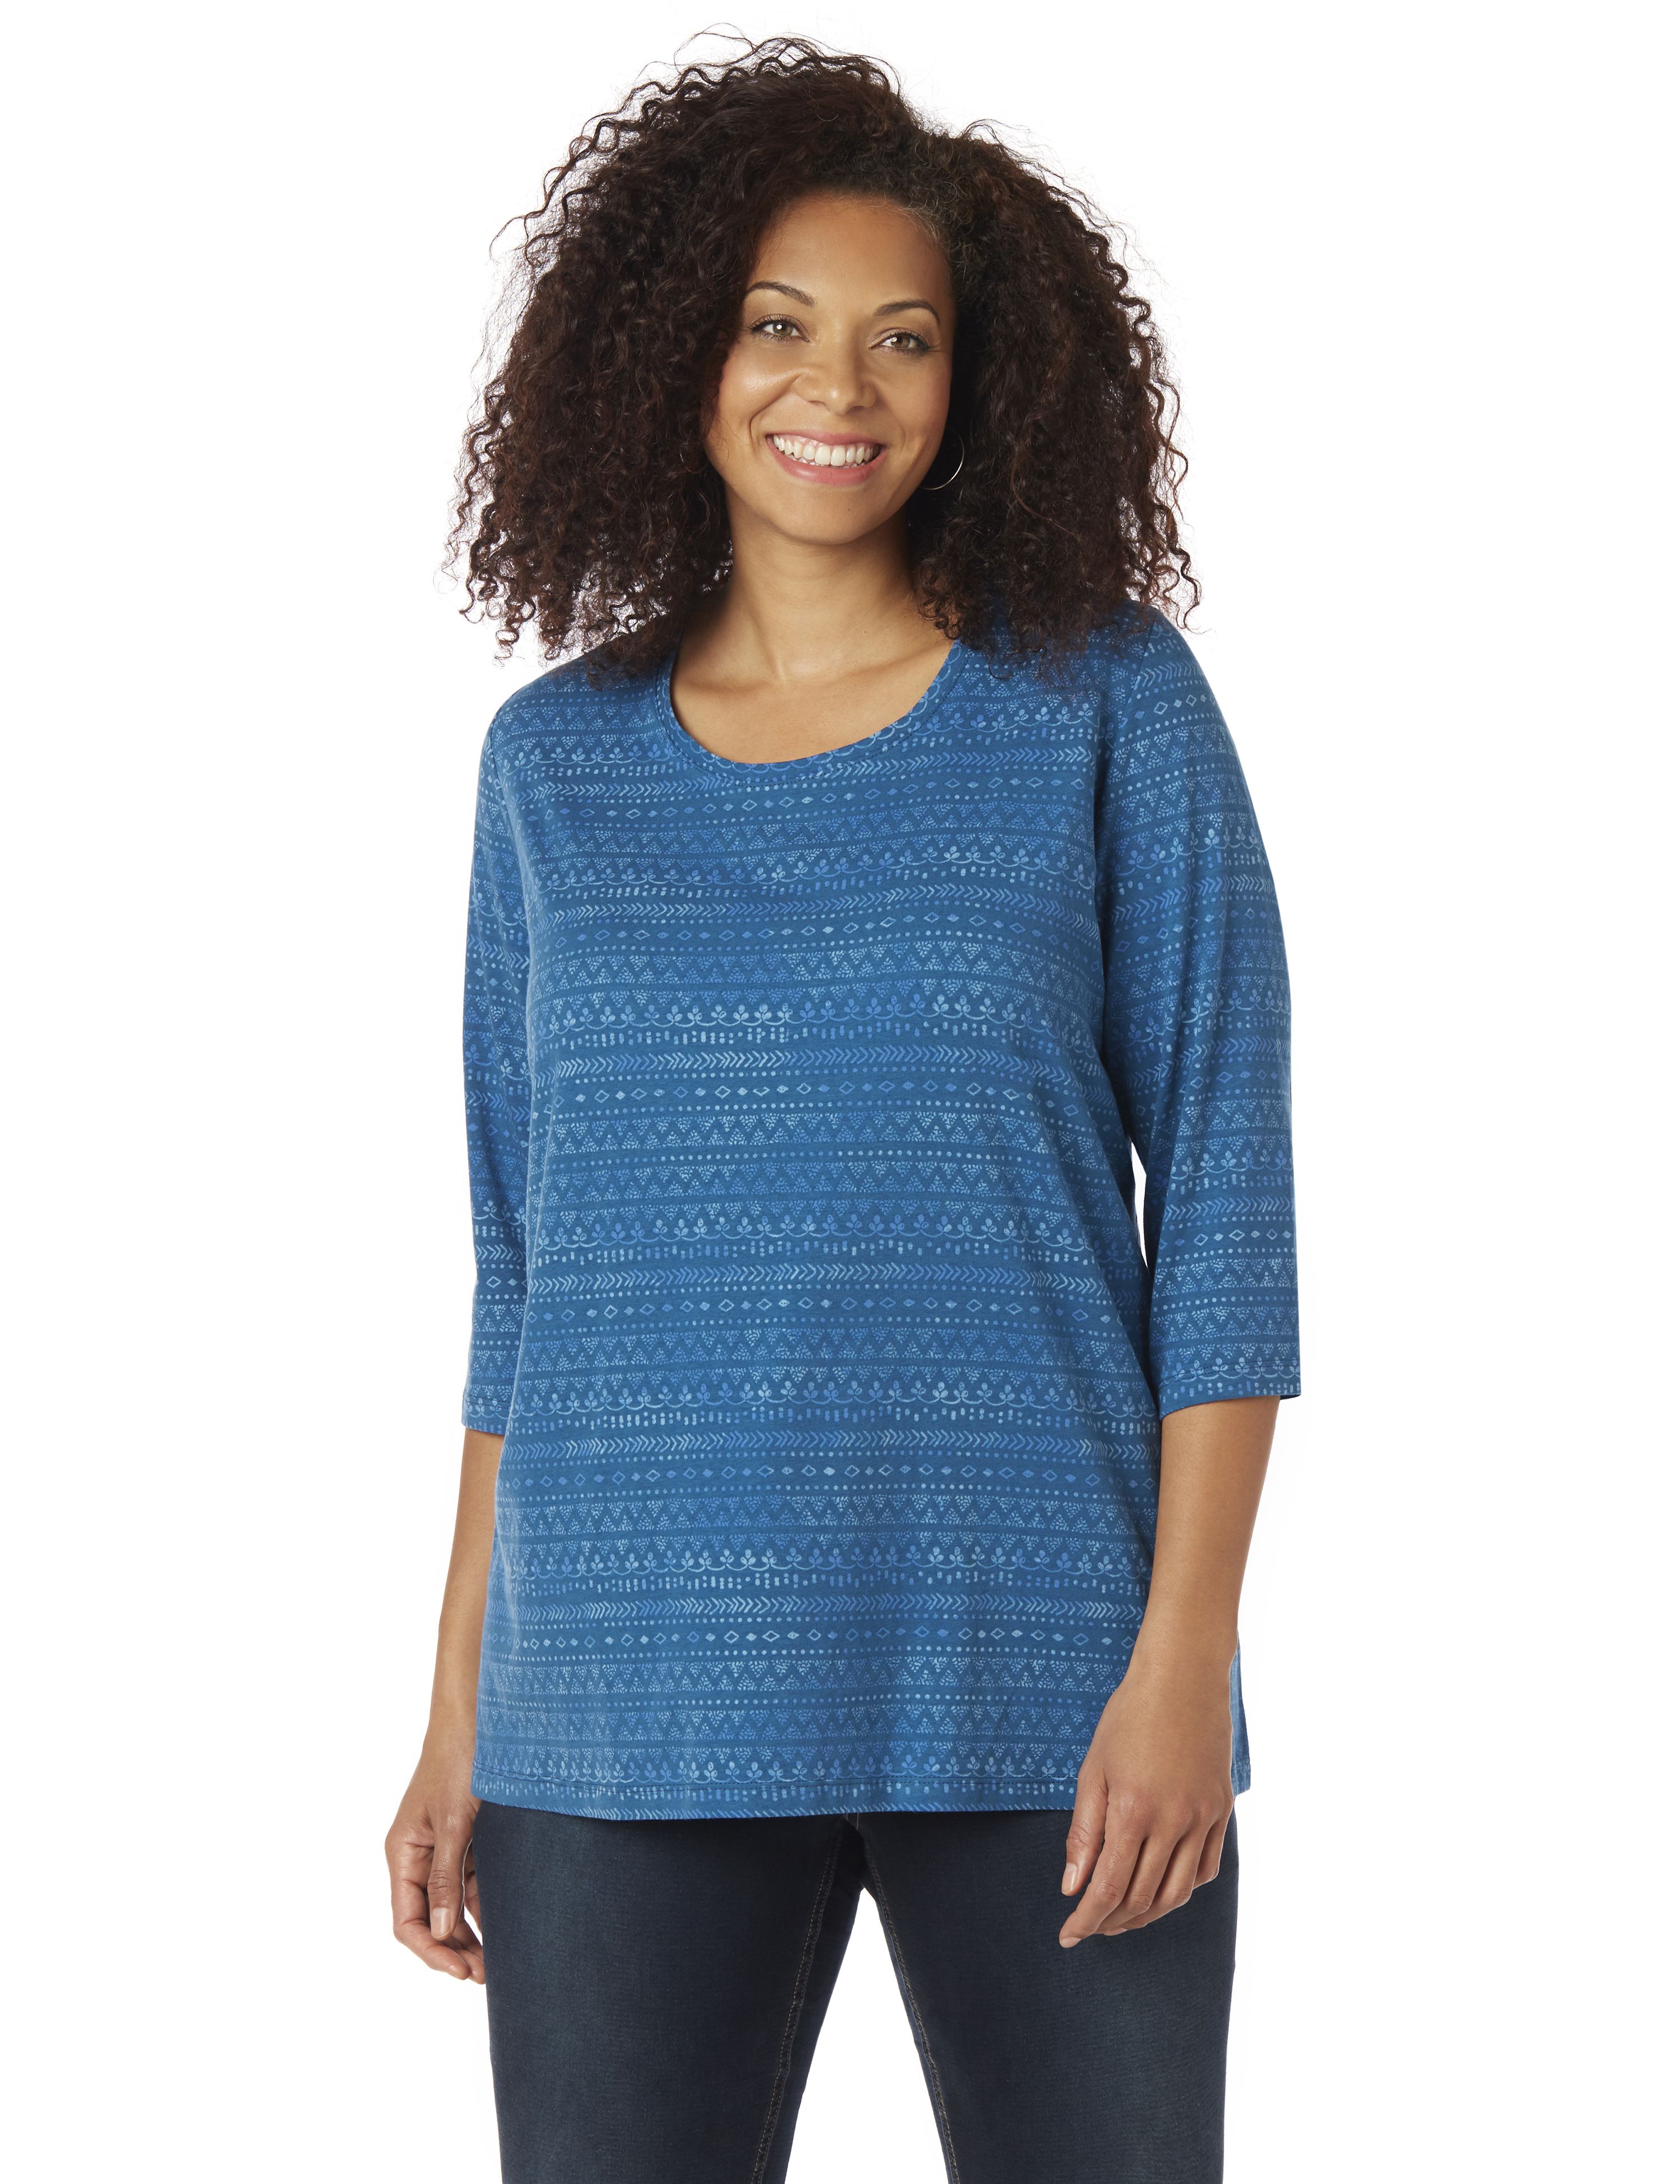 Women's Plus Size Casual Tees & Knit Tops | Catherines